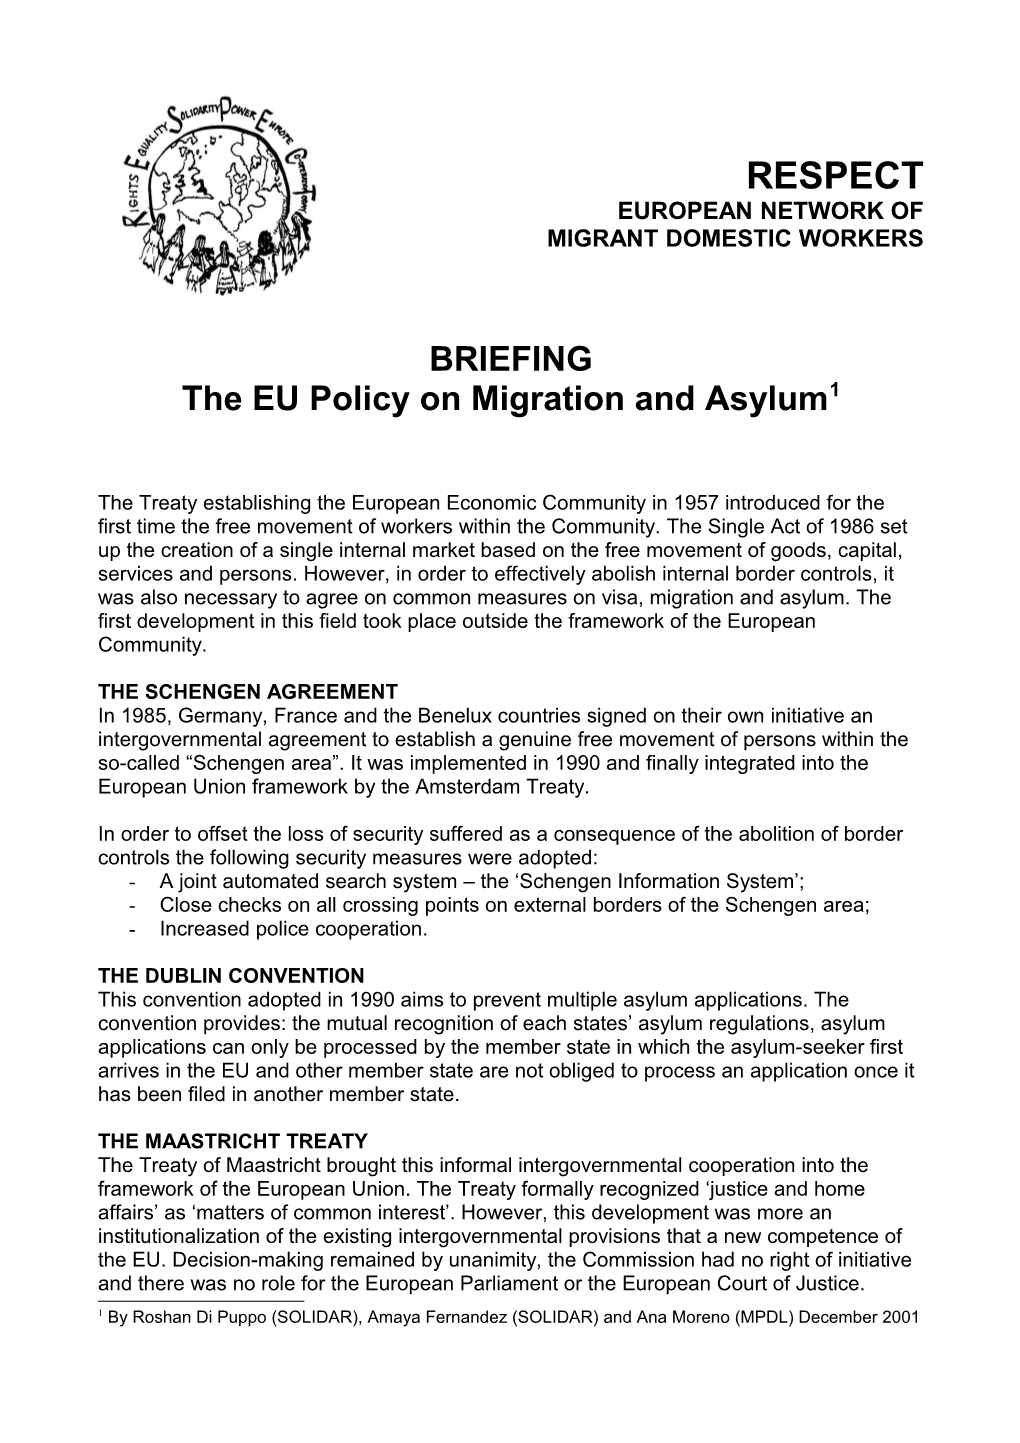 The Policy on Asylum, the Free Movement of Persons, Visa Policy, Rules Governing